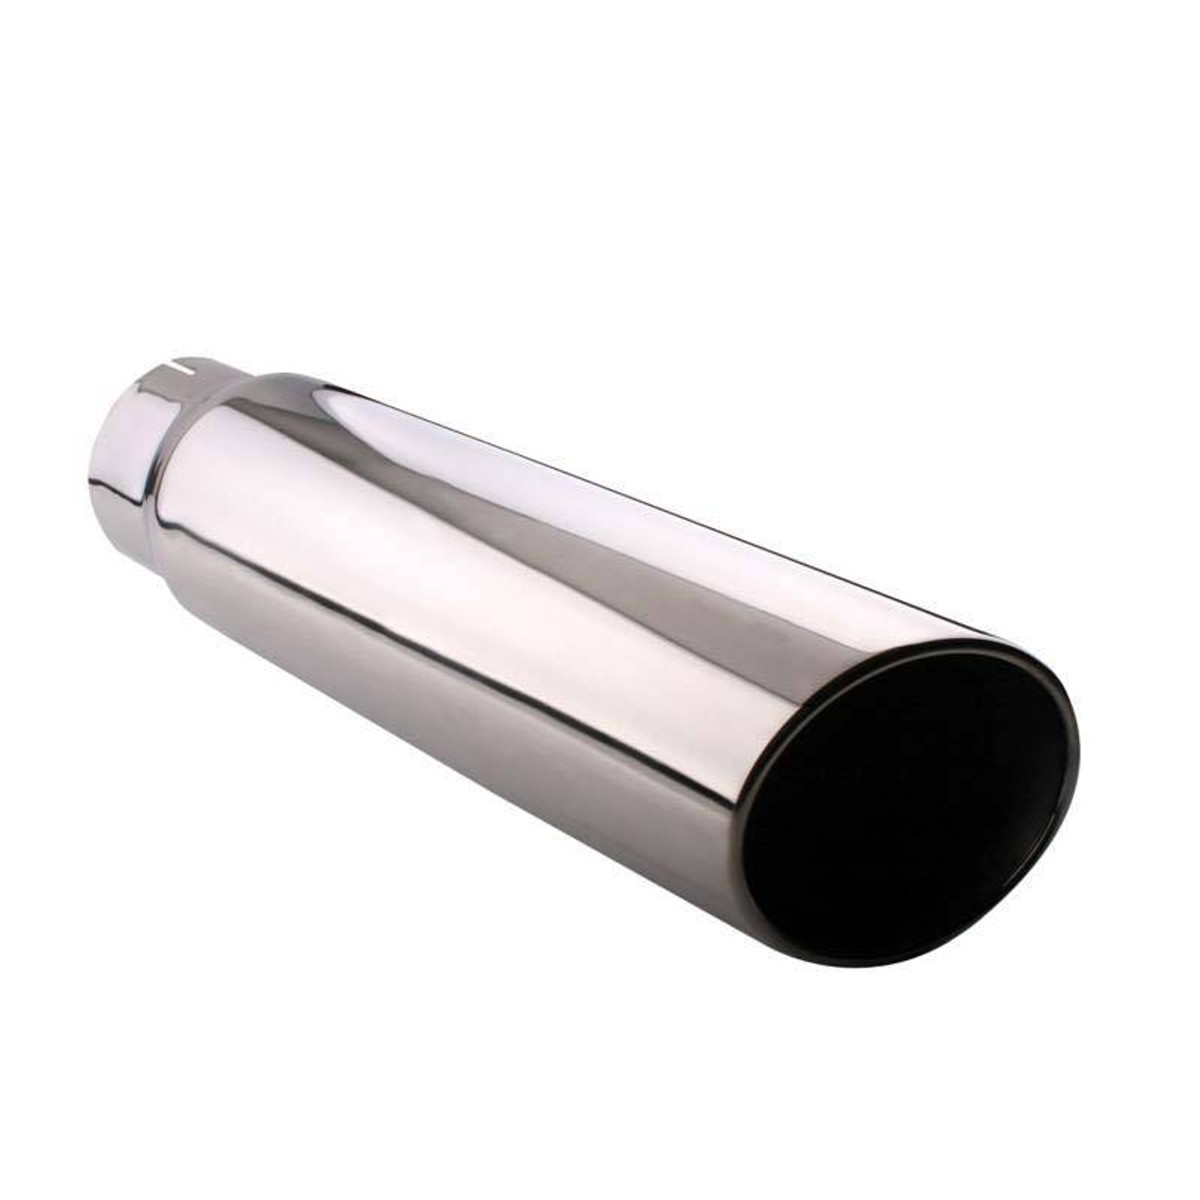 5" x 6" x 18" Rolled Angle Exhaust Tip 5618RA